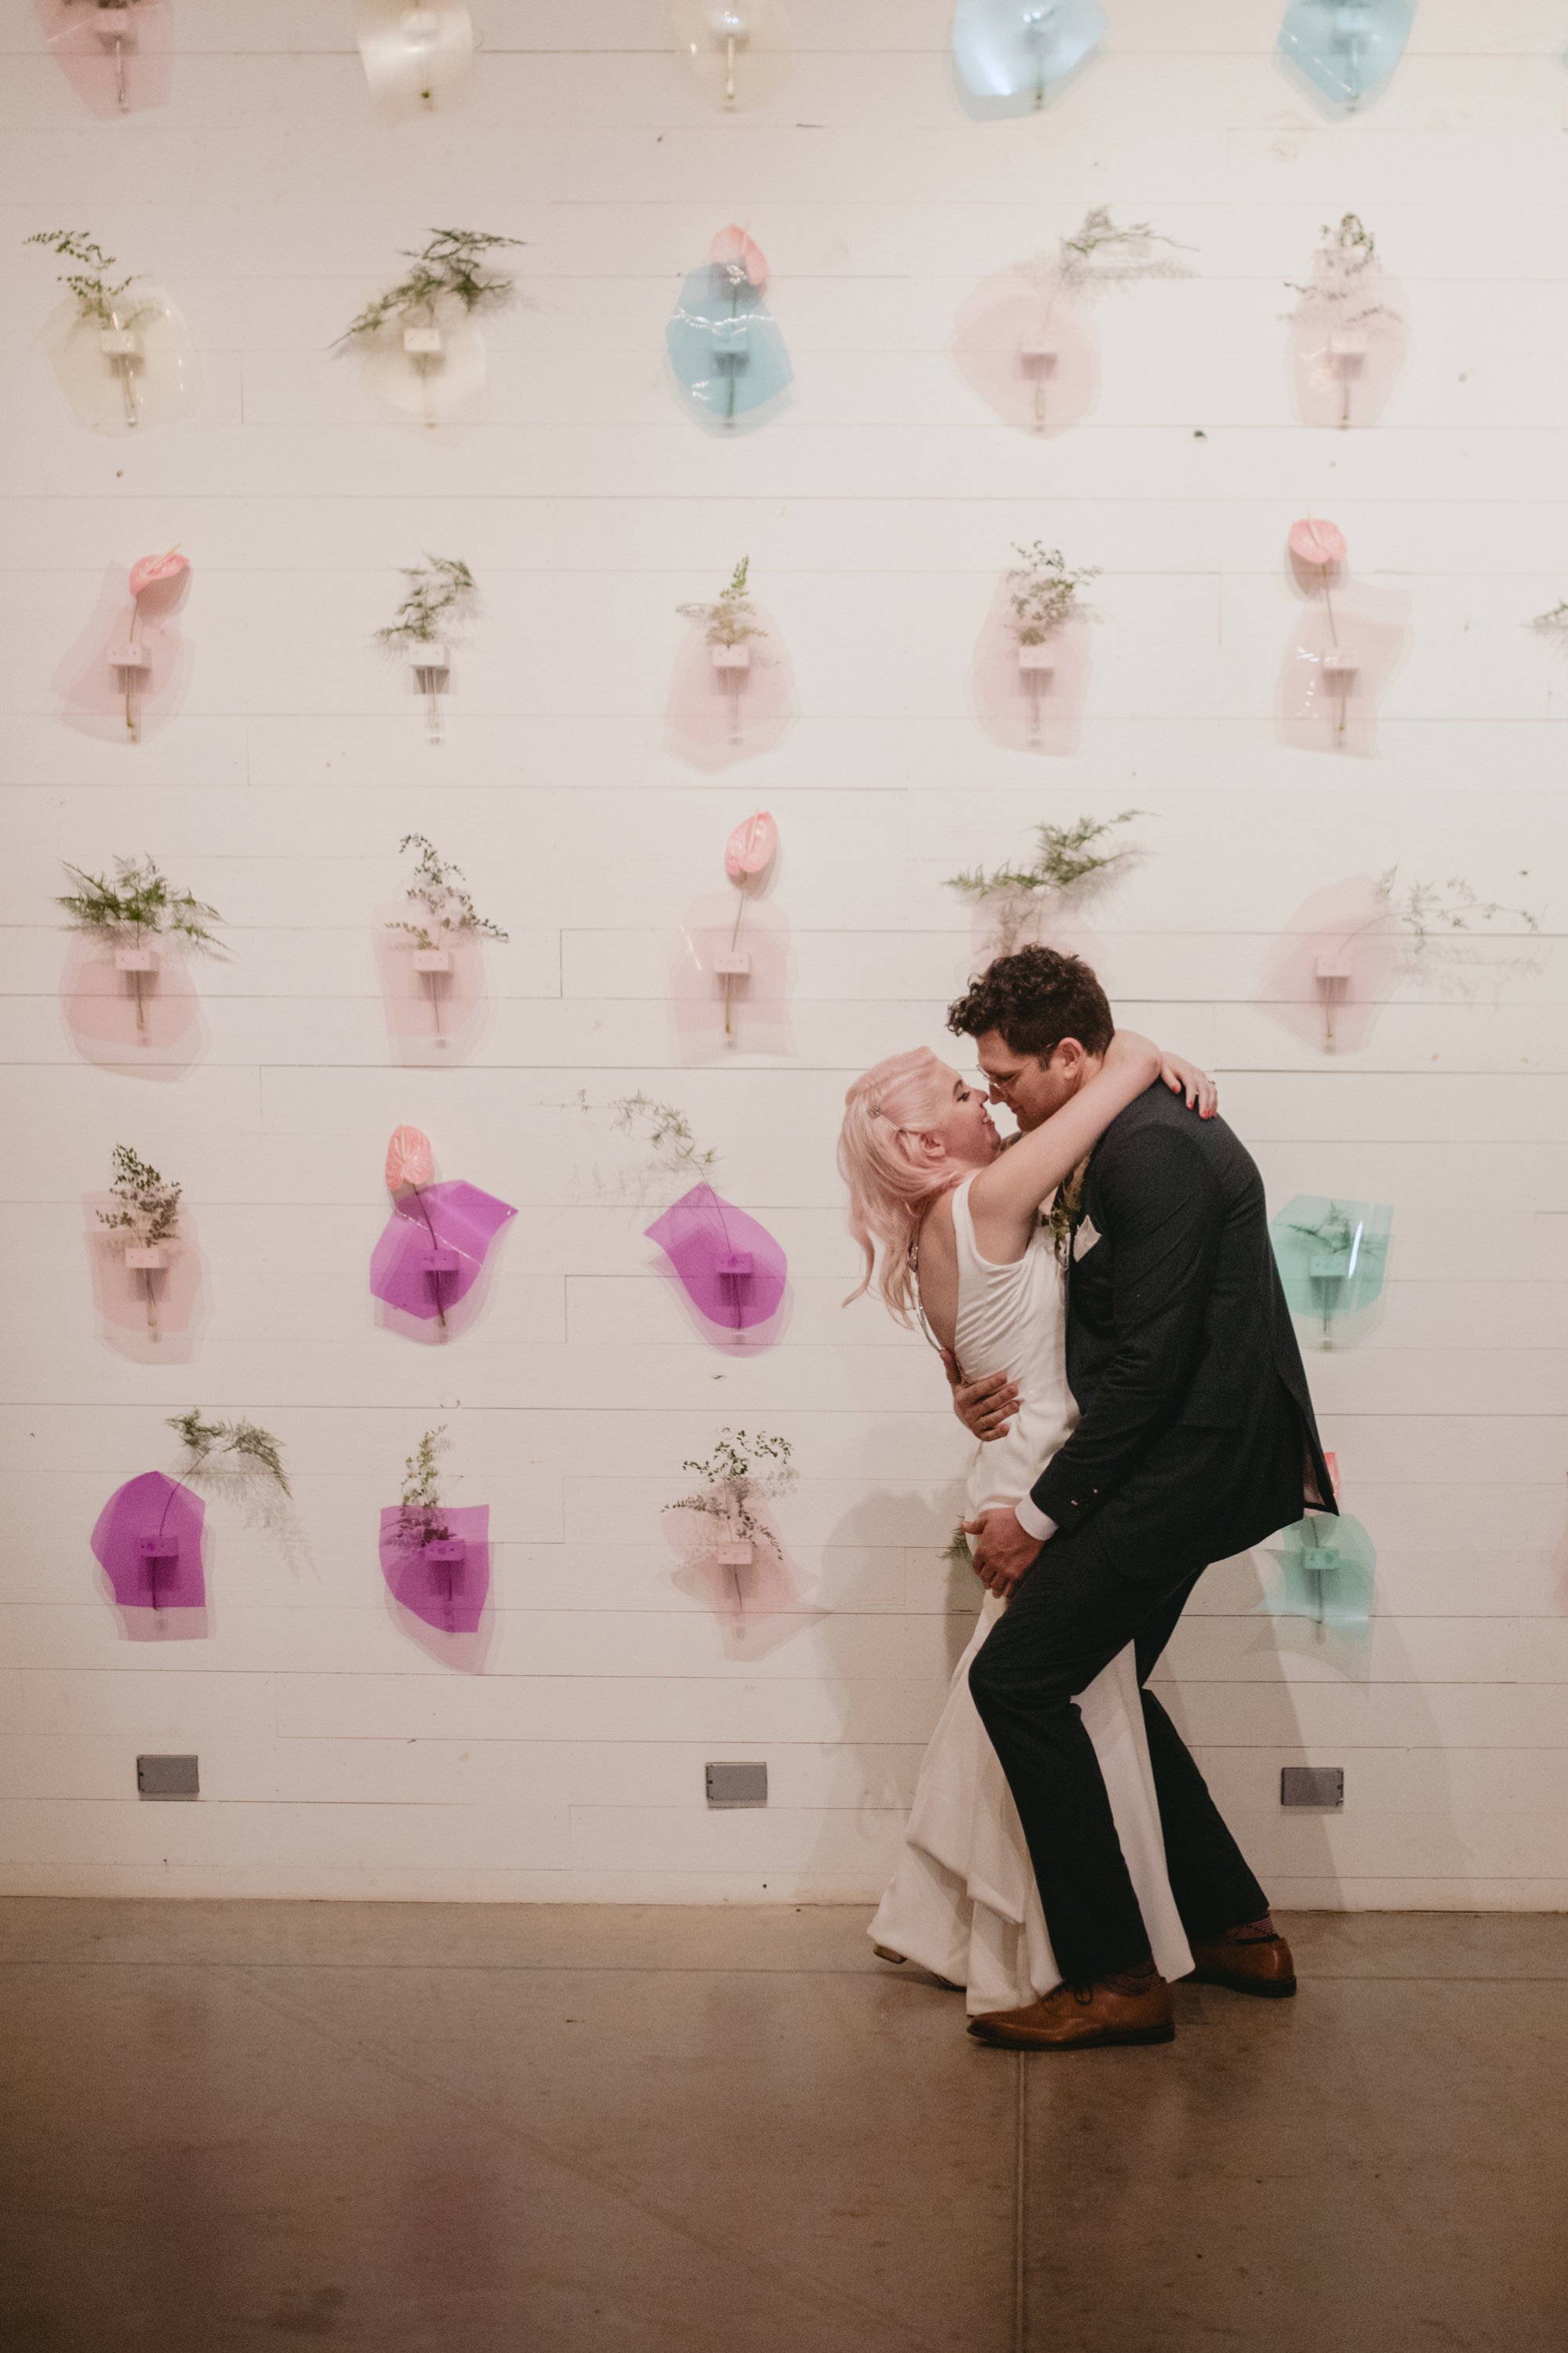 Bride with pink hair and groom in a purple suit prospect house wedding in austin tx with pastel decor and wild florals flower wall kiss